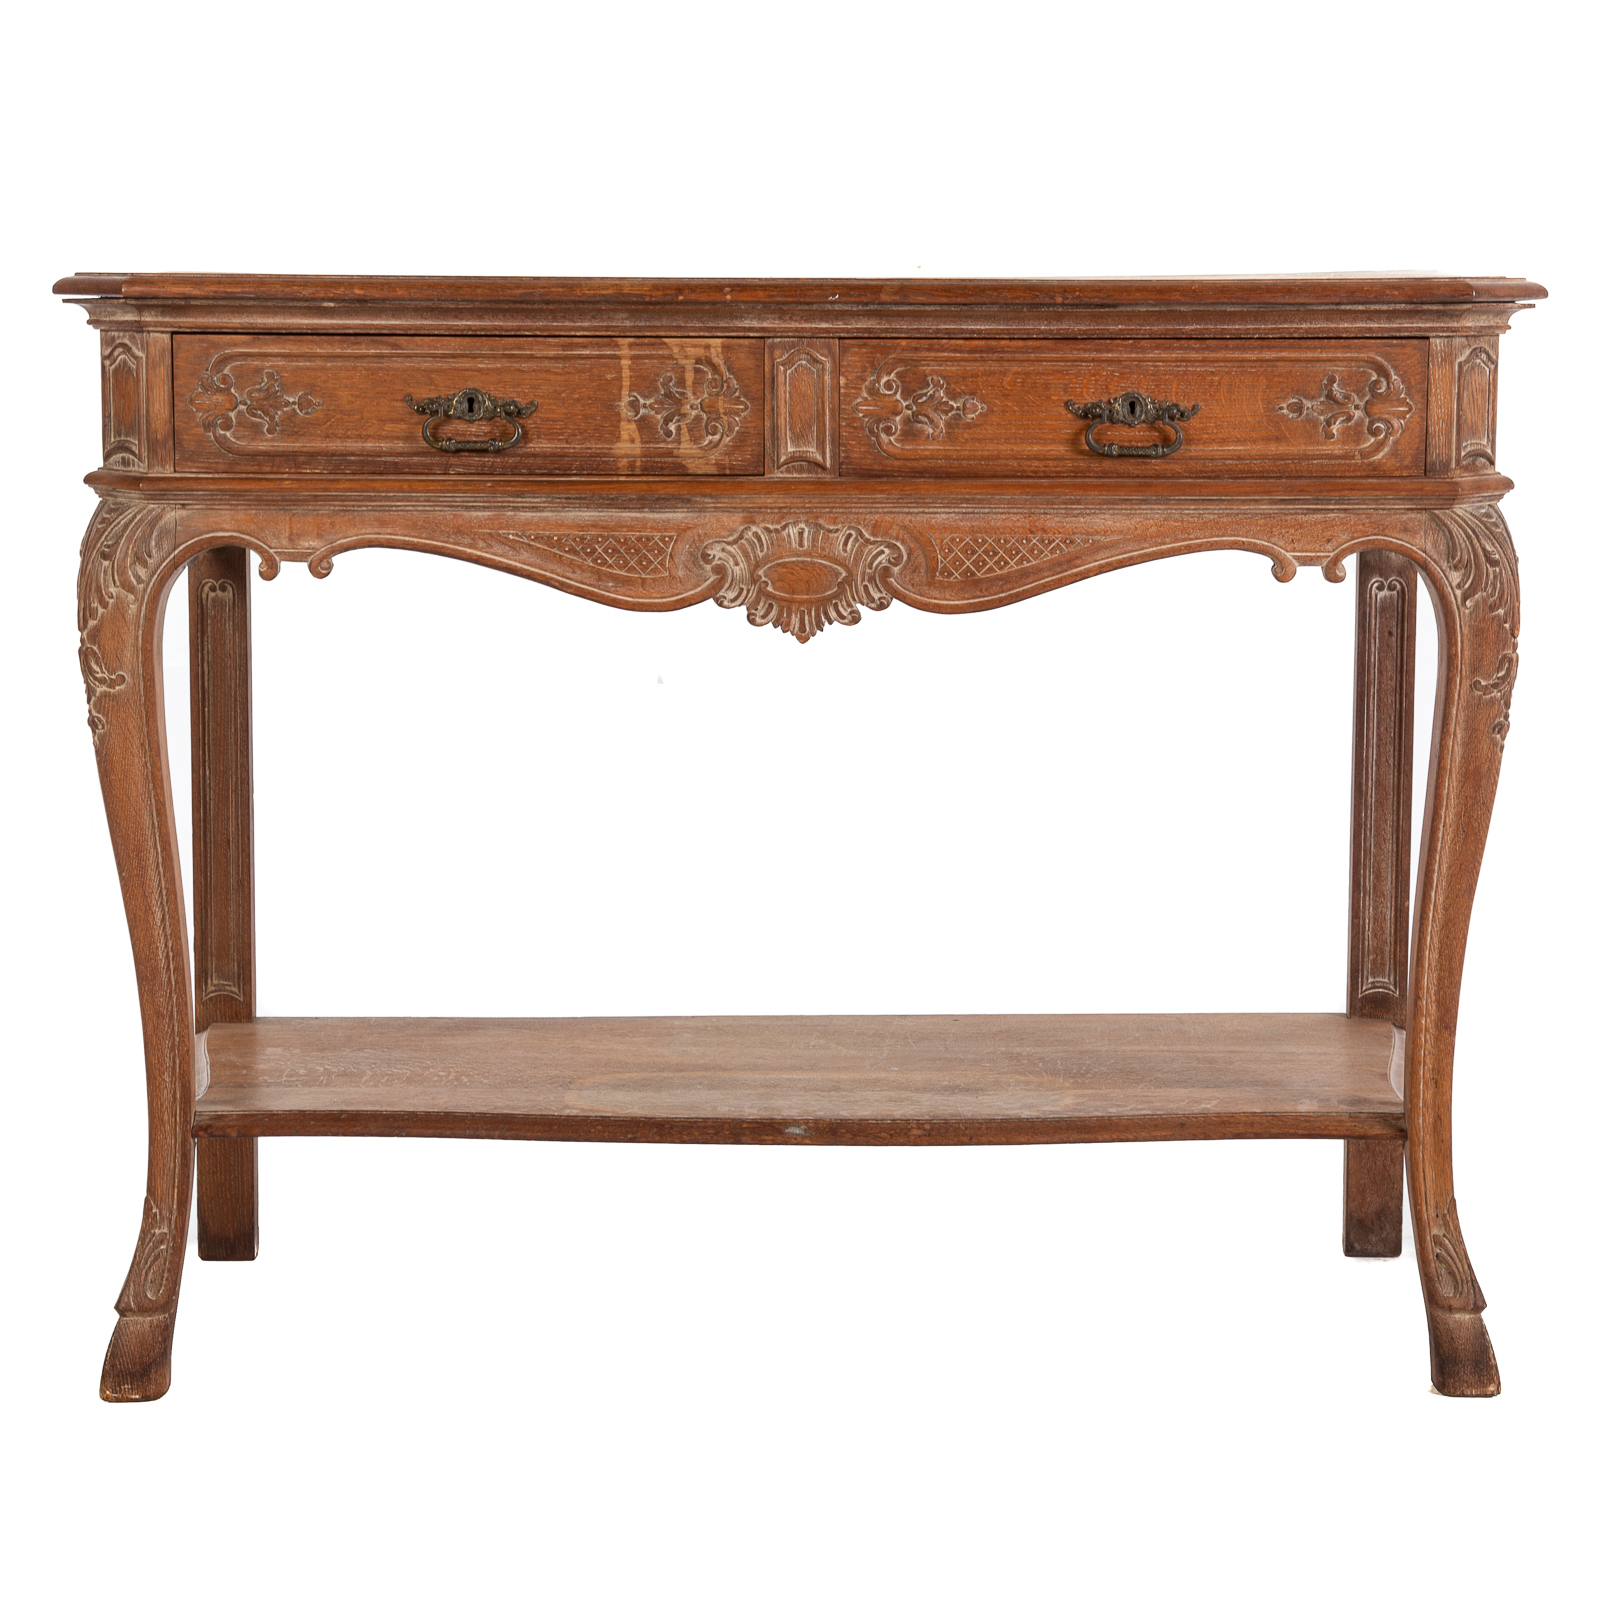 FRENCH OAK TWO-DRAWER CONSOLE TABLE